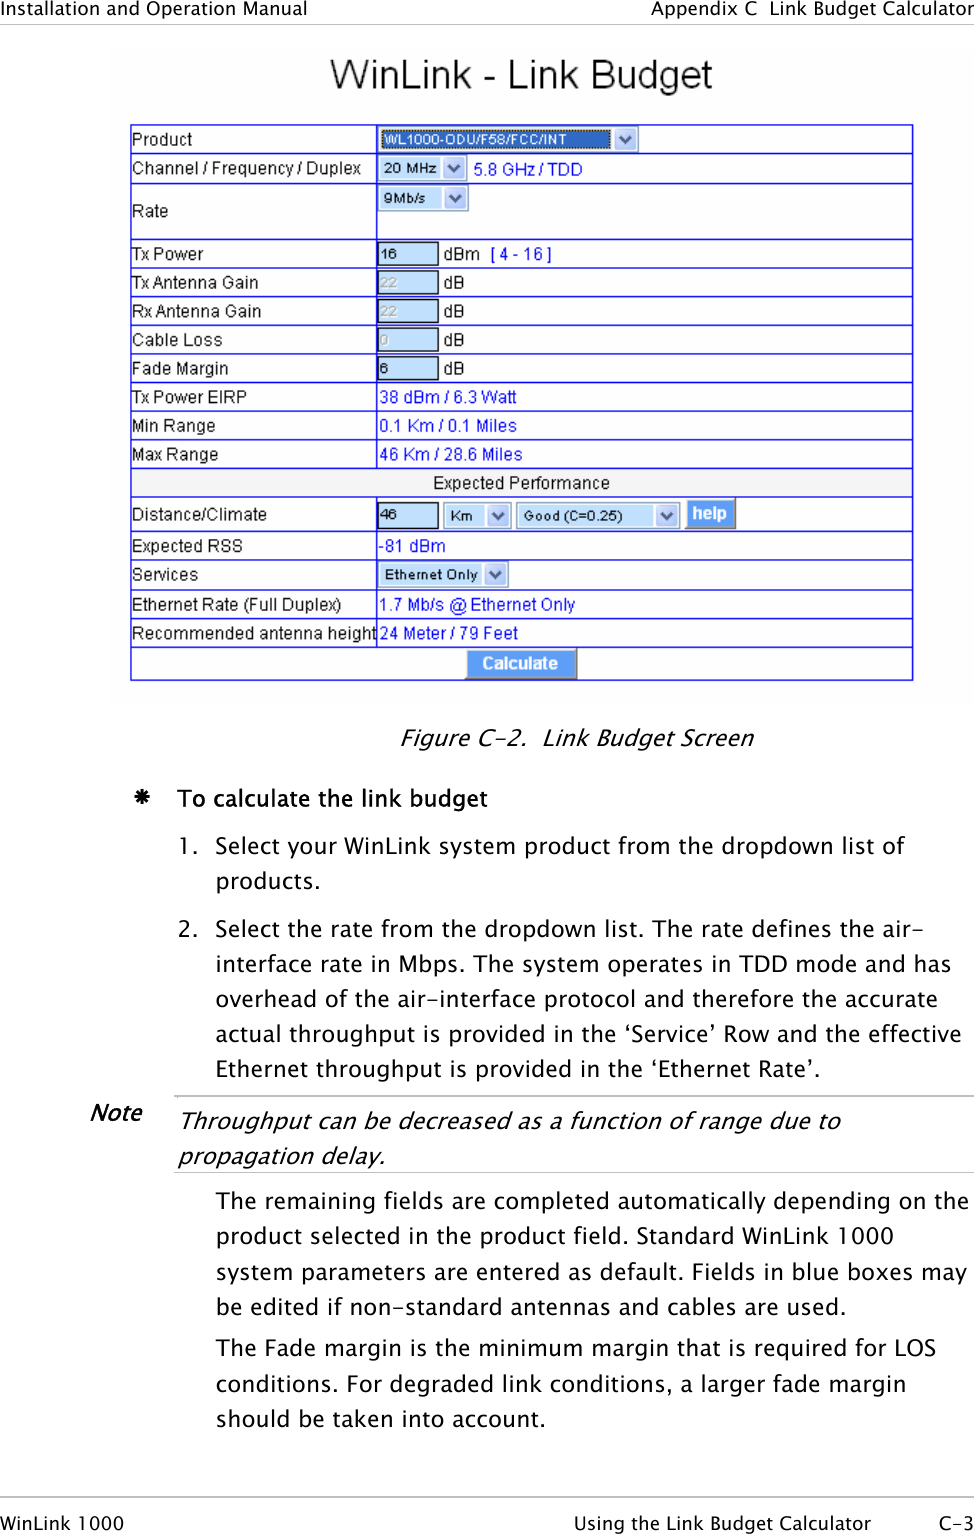 Installation and Operation Manual  Appendix  C  Link Budget Calculator  Figure  C-2.  Link Budget Screen Æ To calculate the link budget 1. Select your WinLink system product from the dropdown list of products. 2. Select the rate from the dropdown list. The rate defines the air-interface rate in Mbps. The system operates in TDD mode and has overhead of the air-interface protocol and therefore the accurate actual throughput is provided in the ‘Service’ Row and the effective Ethernet throughput is provided in the ‘Ethernet Rate’. Note •  Throughput can be decreased as a function of range due to propagation delay.  The remaining fields are completed automatically depending on the product selected in the product field. Standard WinLink 1000 system parameters are entered as default. Fields in blue boxes may be edited if non-standard antennas and cables are used. The Fade margin is the minimum margin that is required for LOS conditions. For degraded link conditions, a larger fade margin should be taken into account. WinLink 1000  Using the Link Budget Calculator  C-3 